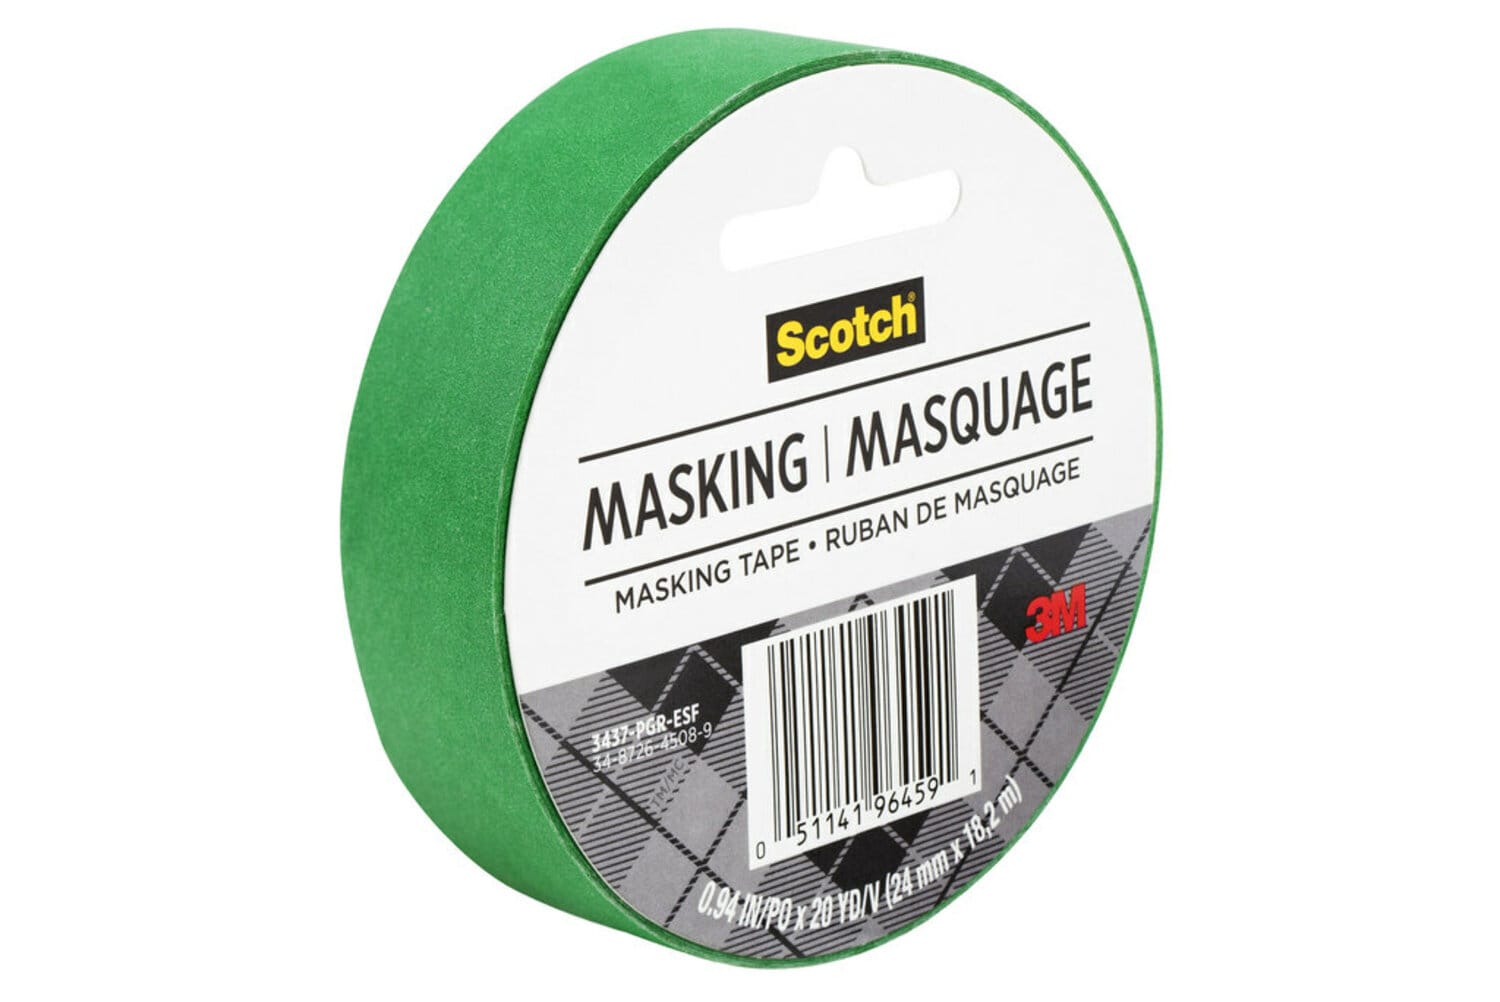 7100074401 - Scotch Expressions Masking Tape, 3437-PGR-ESF, Primary Green